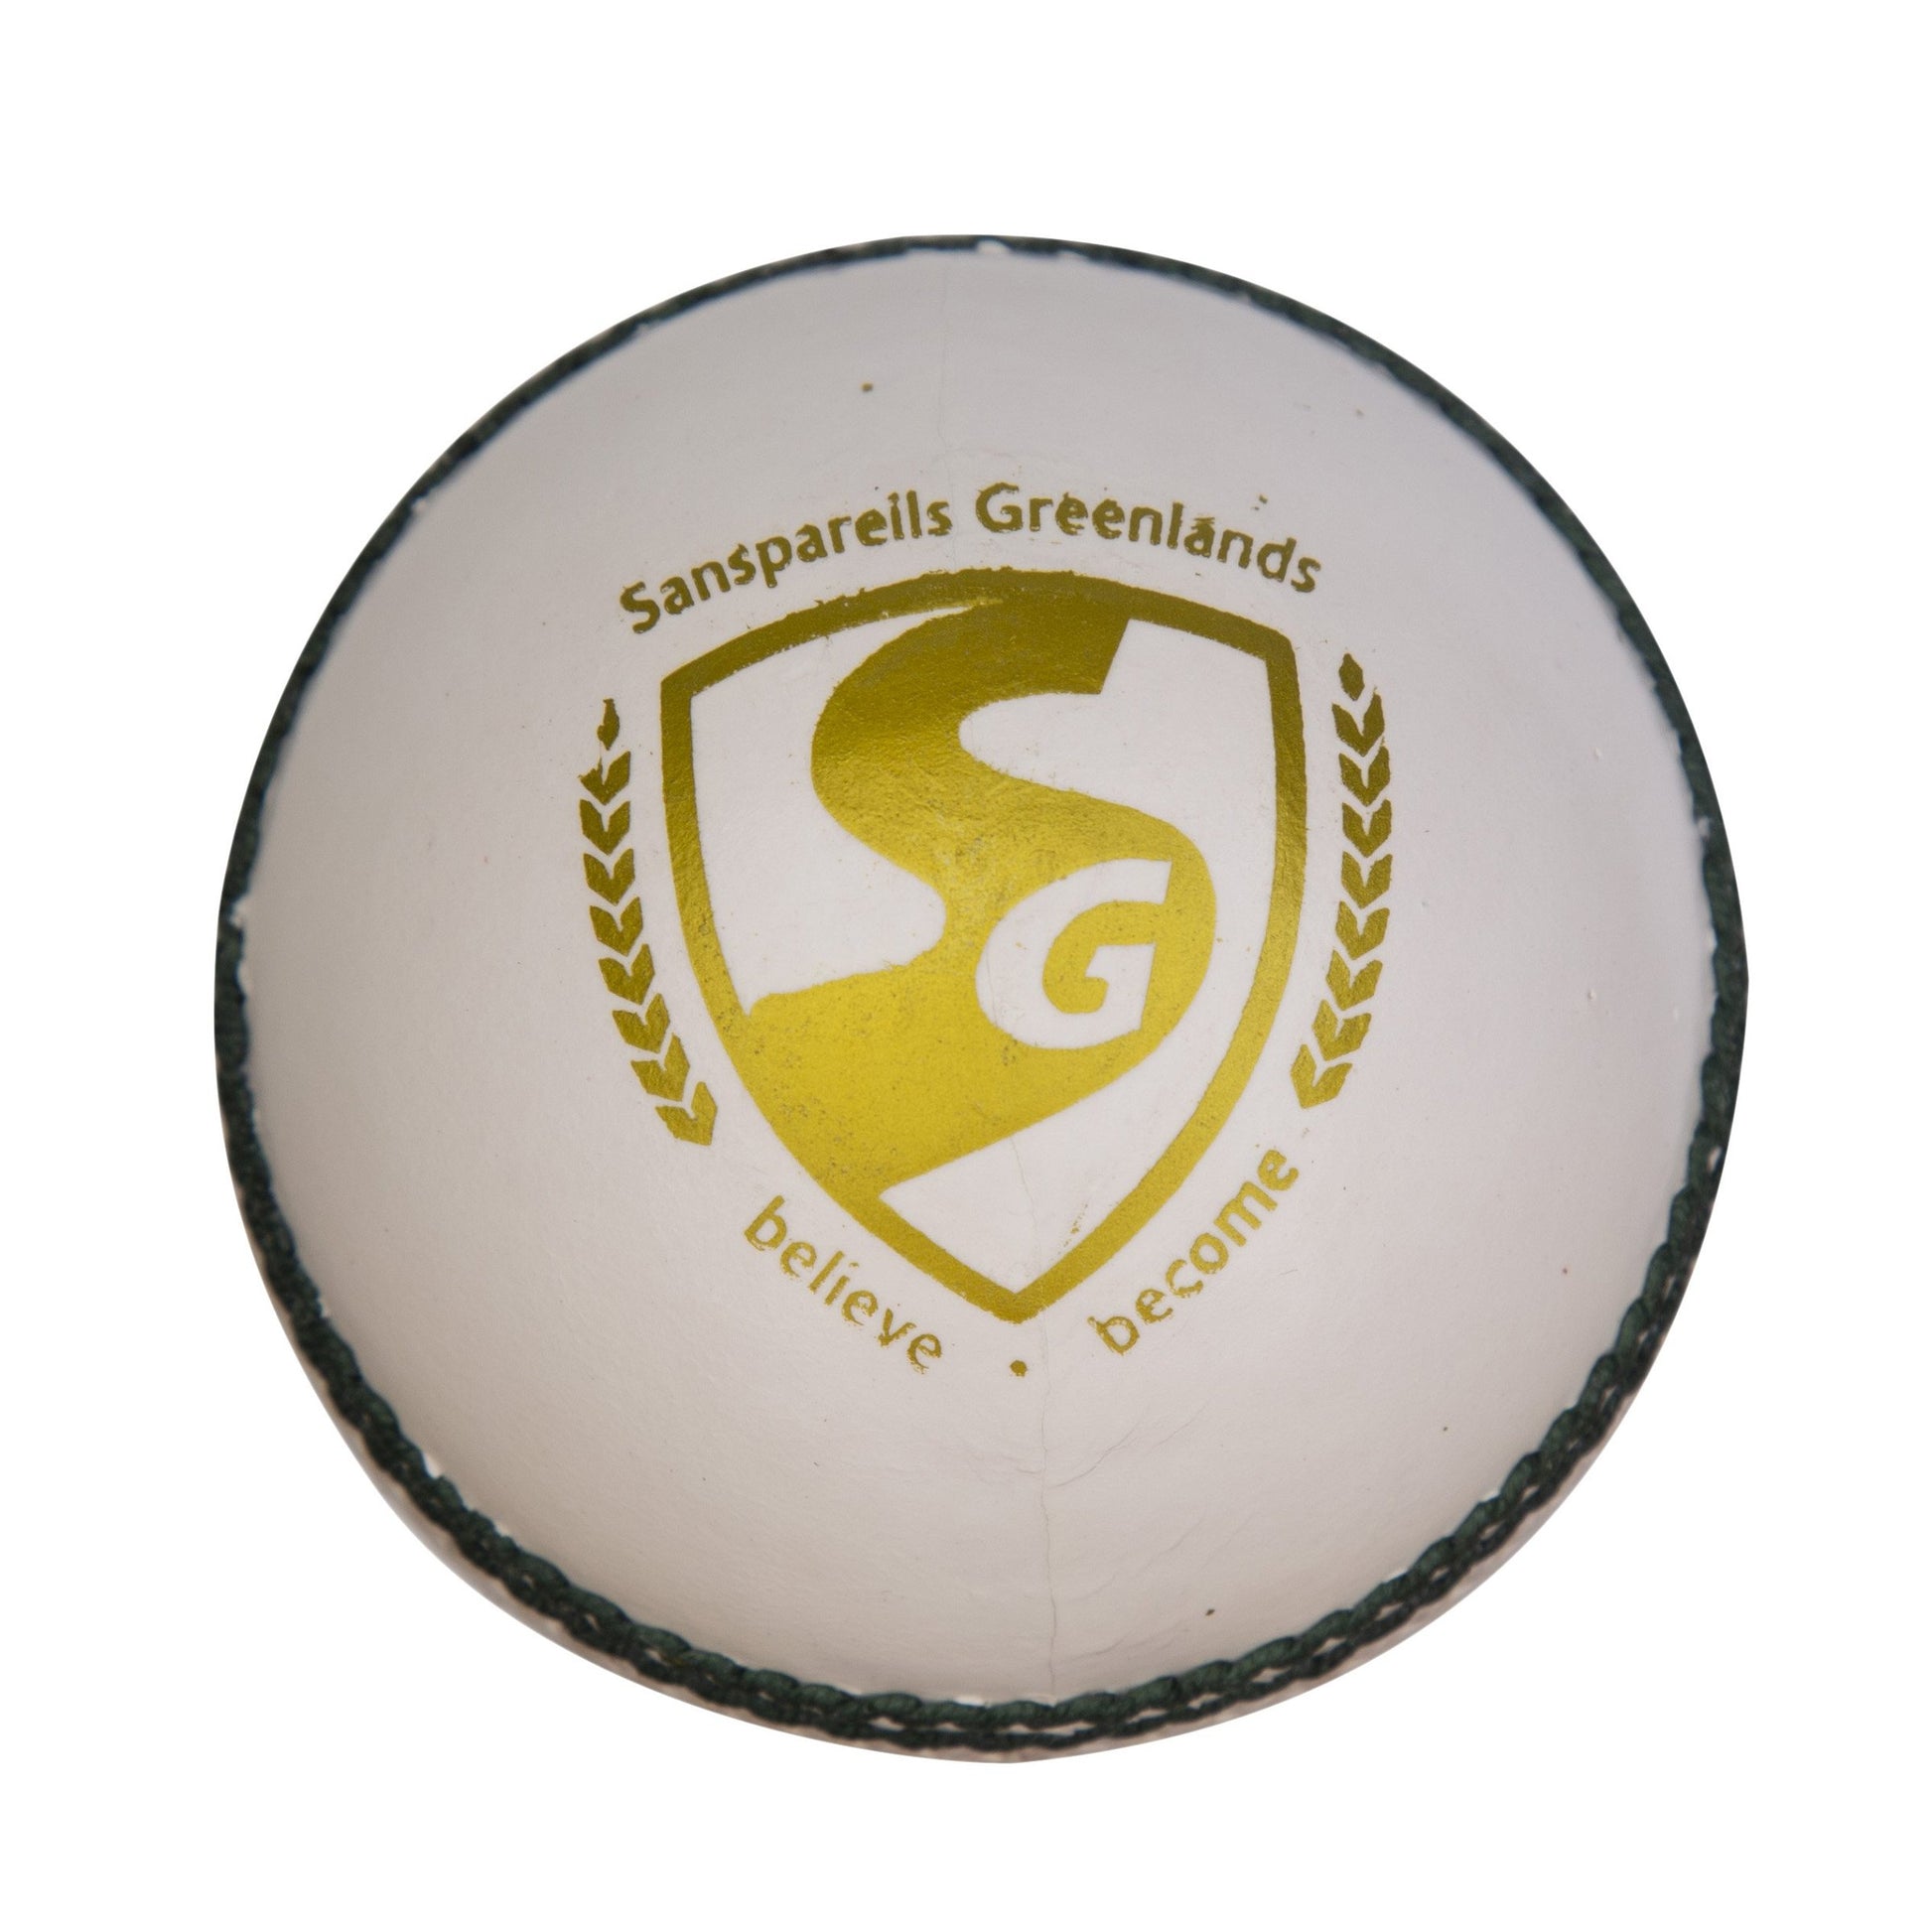 SG Club™ White High Quality Four-Piece Water Proof Cricket Leather Ball